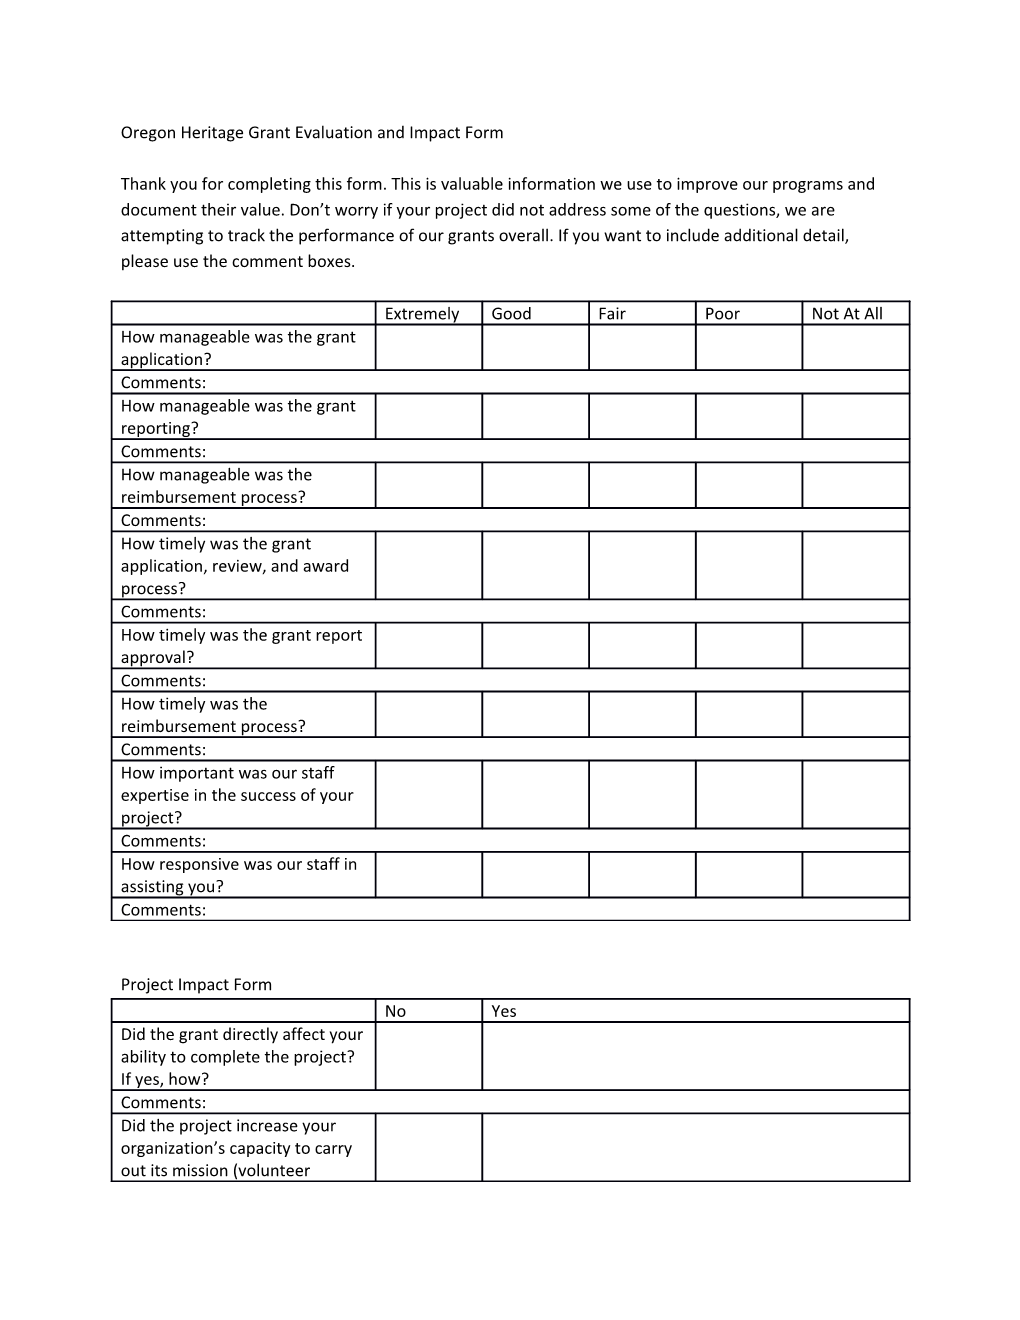 Oregon Heritage Grant Evaluation and Impact Form